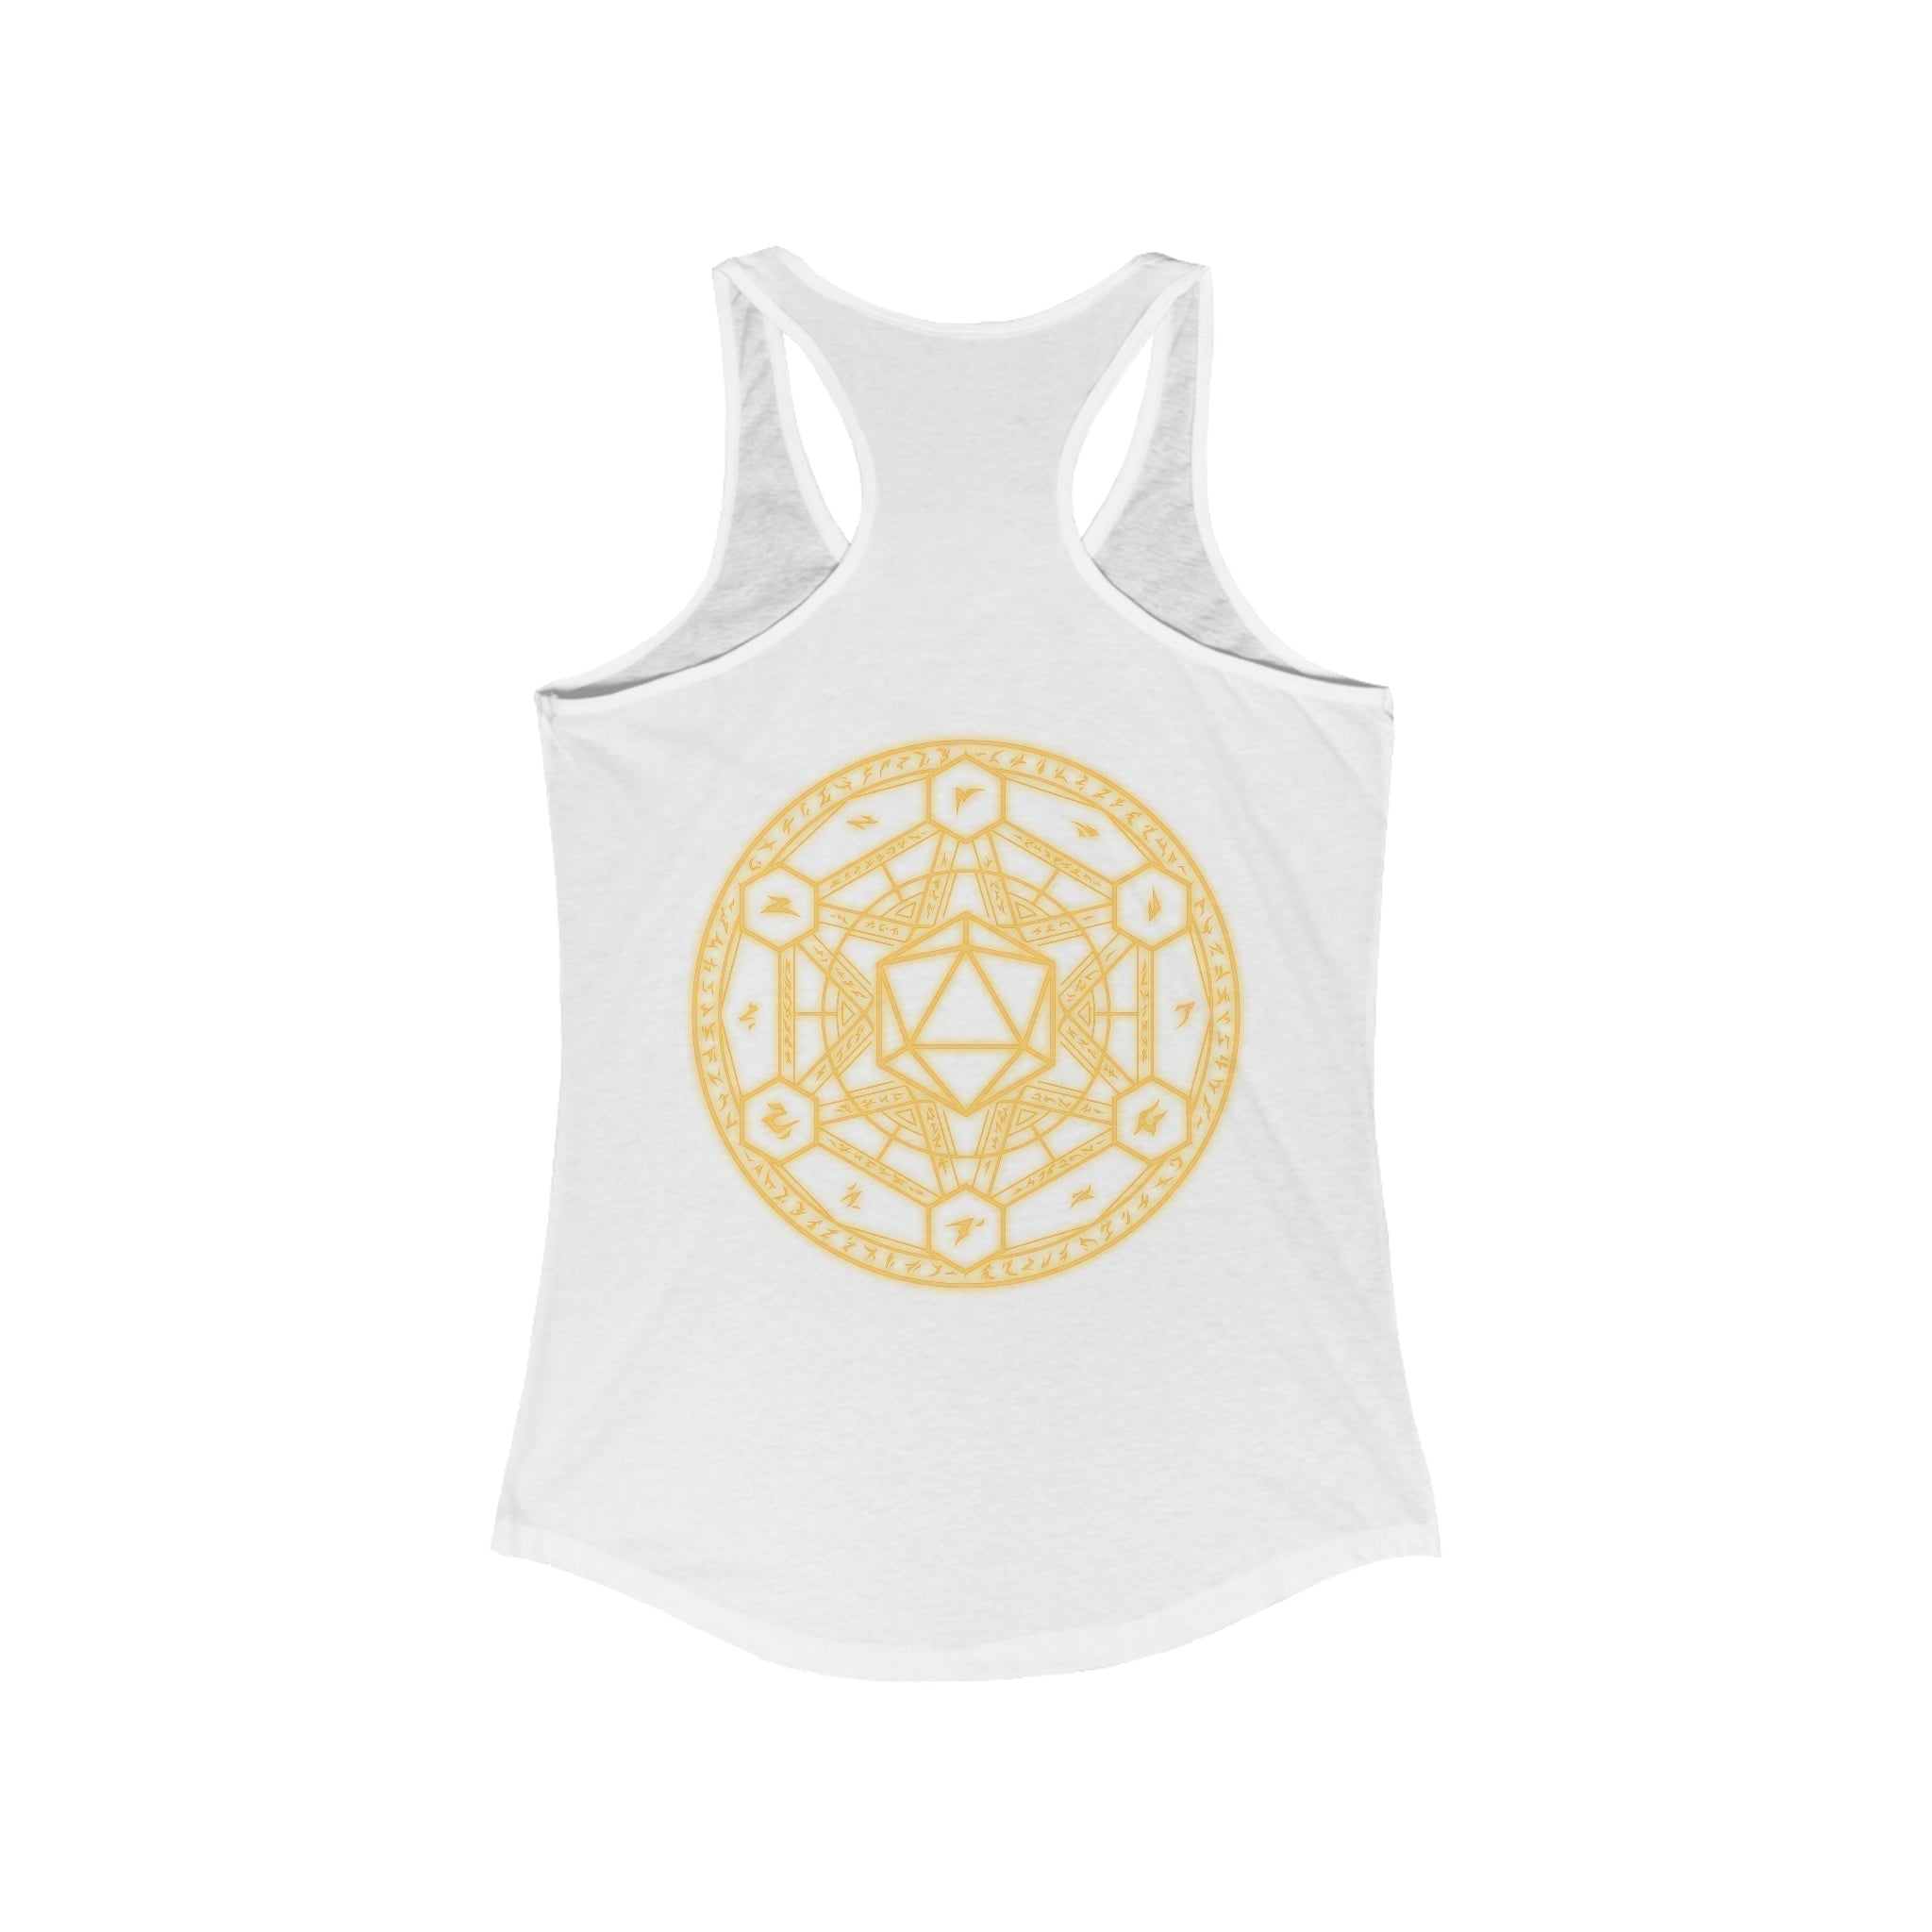 Spell Circle - Norse Foundry Women's Tank Top - 24638355375044058487_Parent